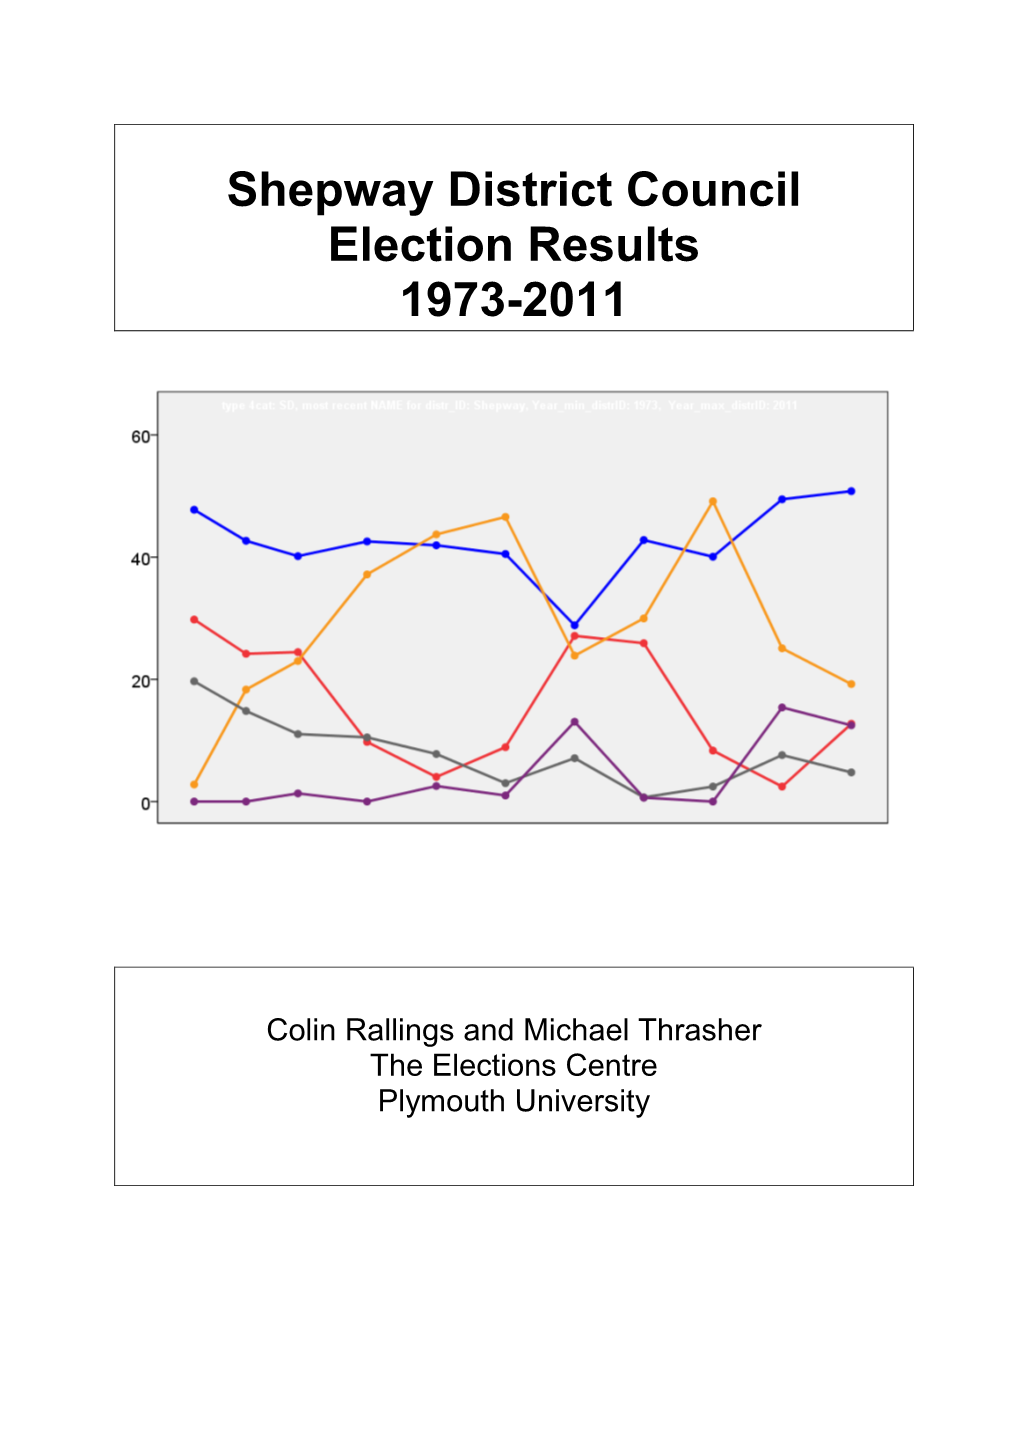 Shepway District Council Election Results 1973-2011